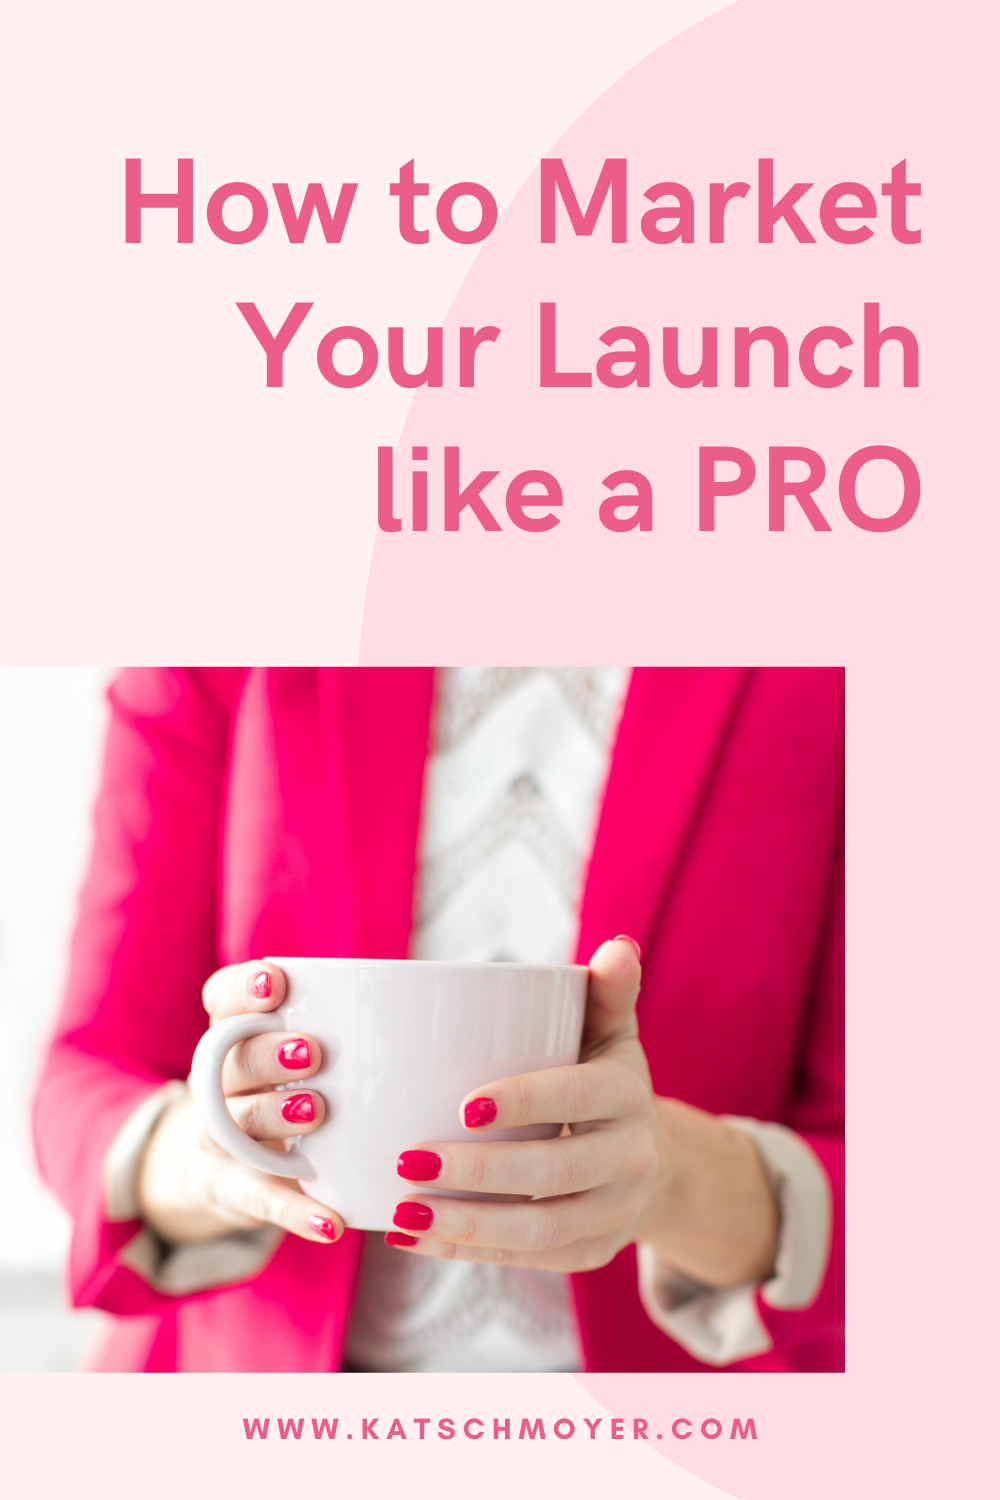 How to Market Your Launch like a PRO